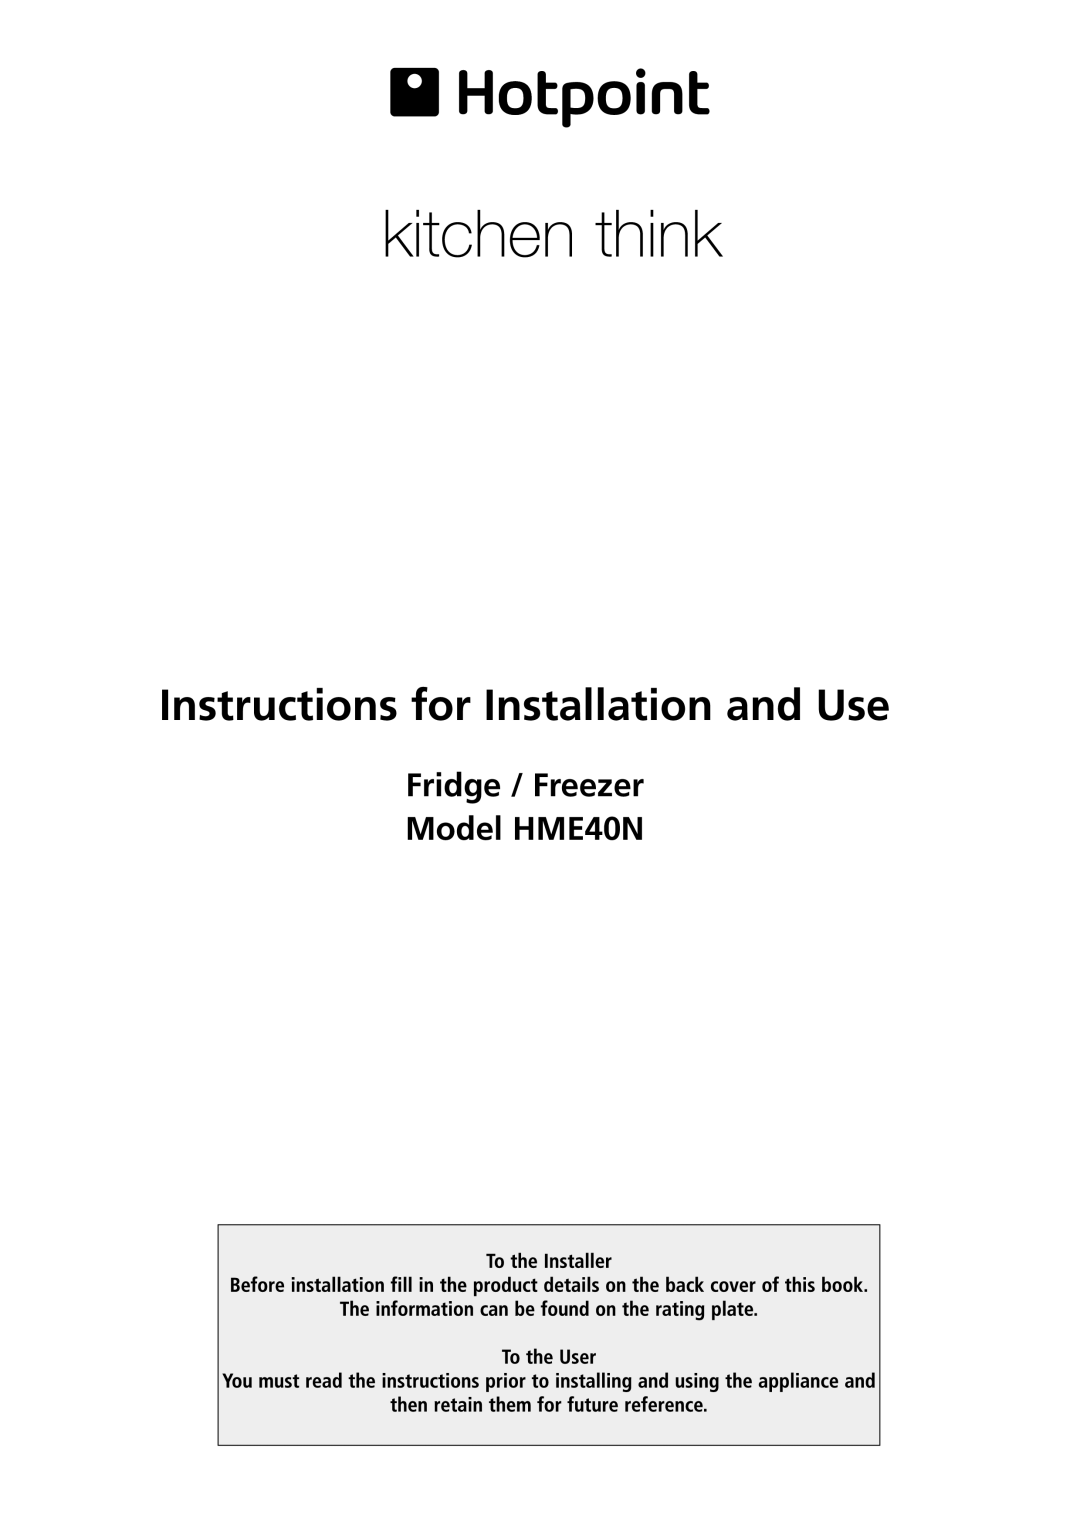 Hotpoint manual Instructions for Installation and Use, Fridge / Freezer Model HME40N 